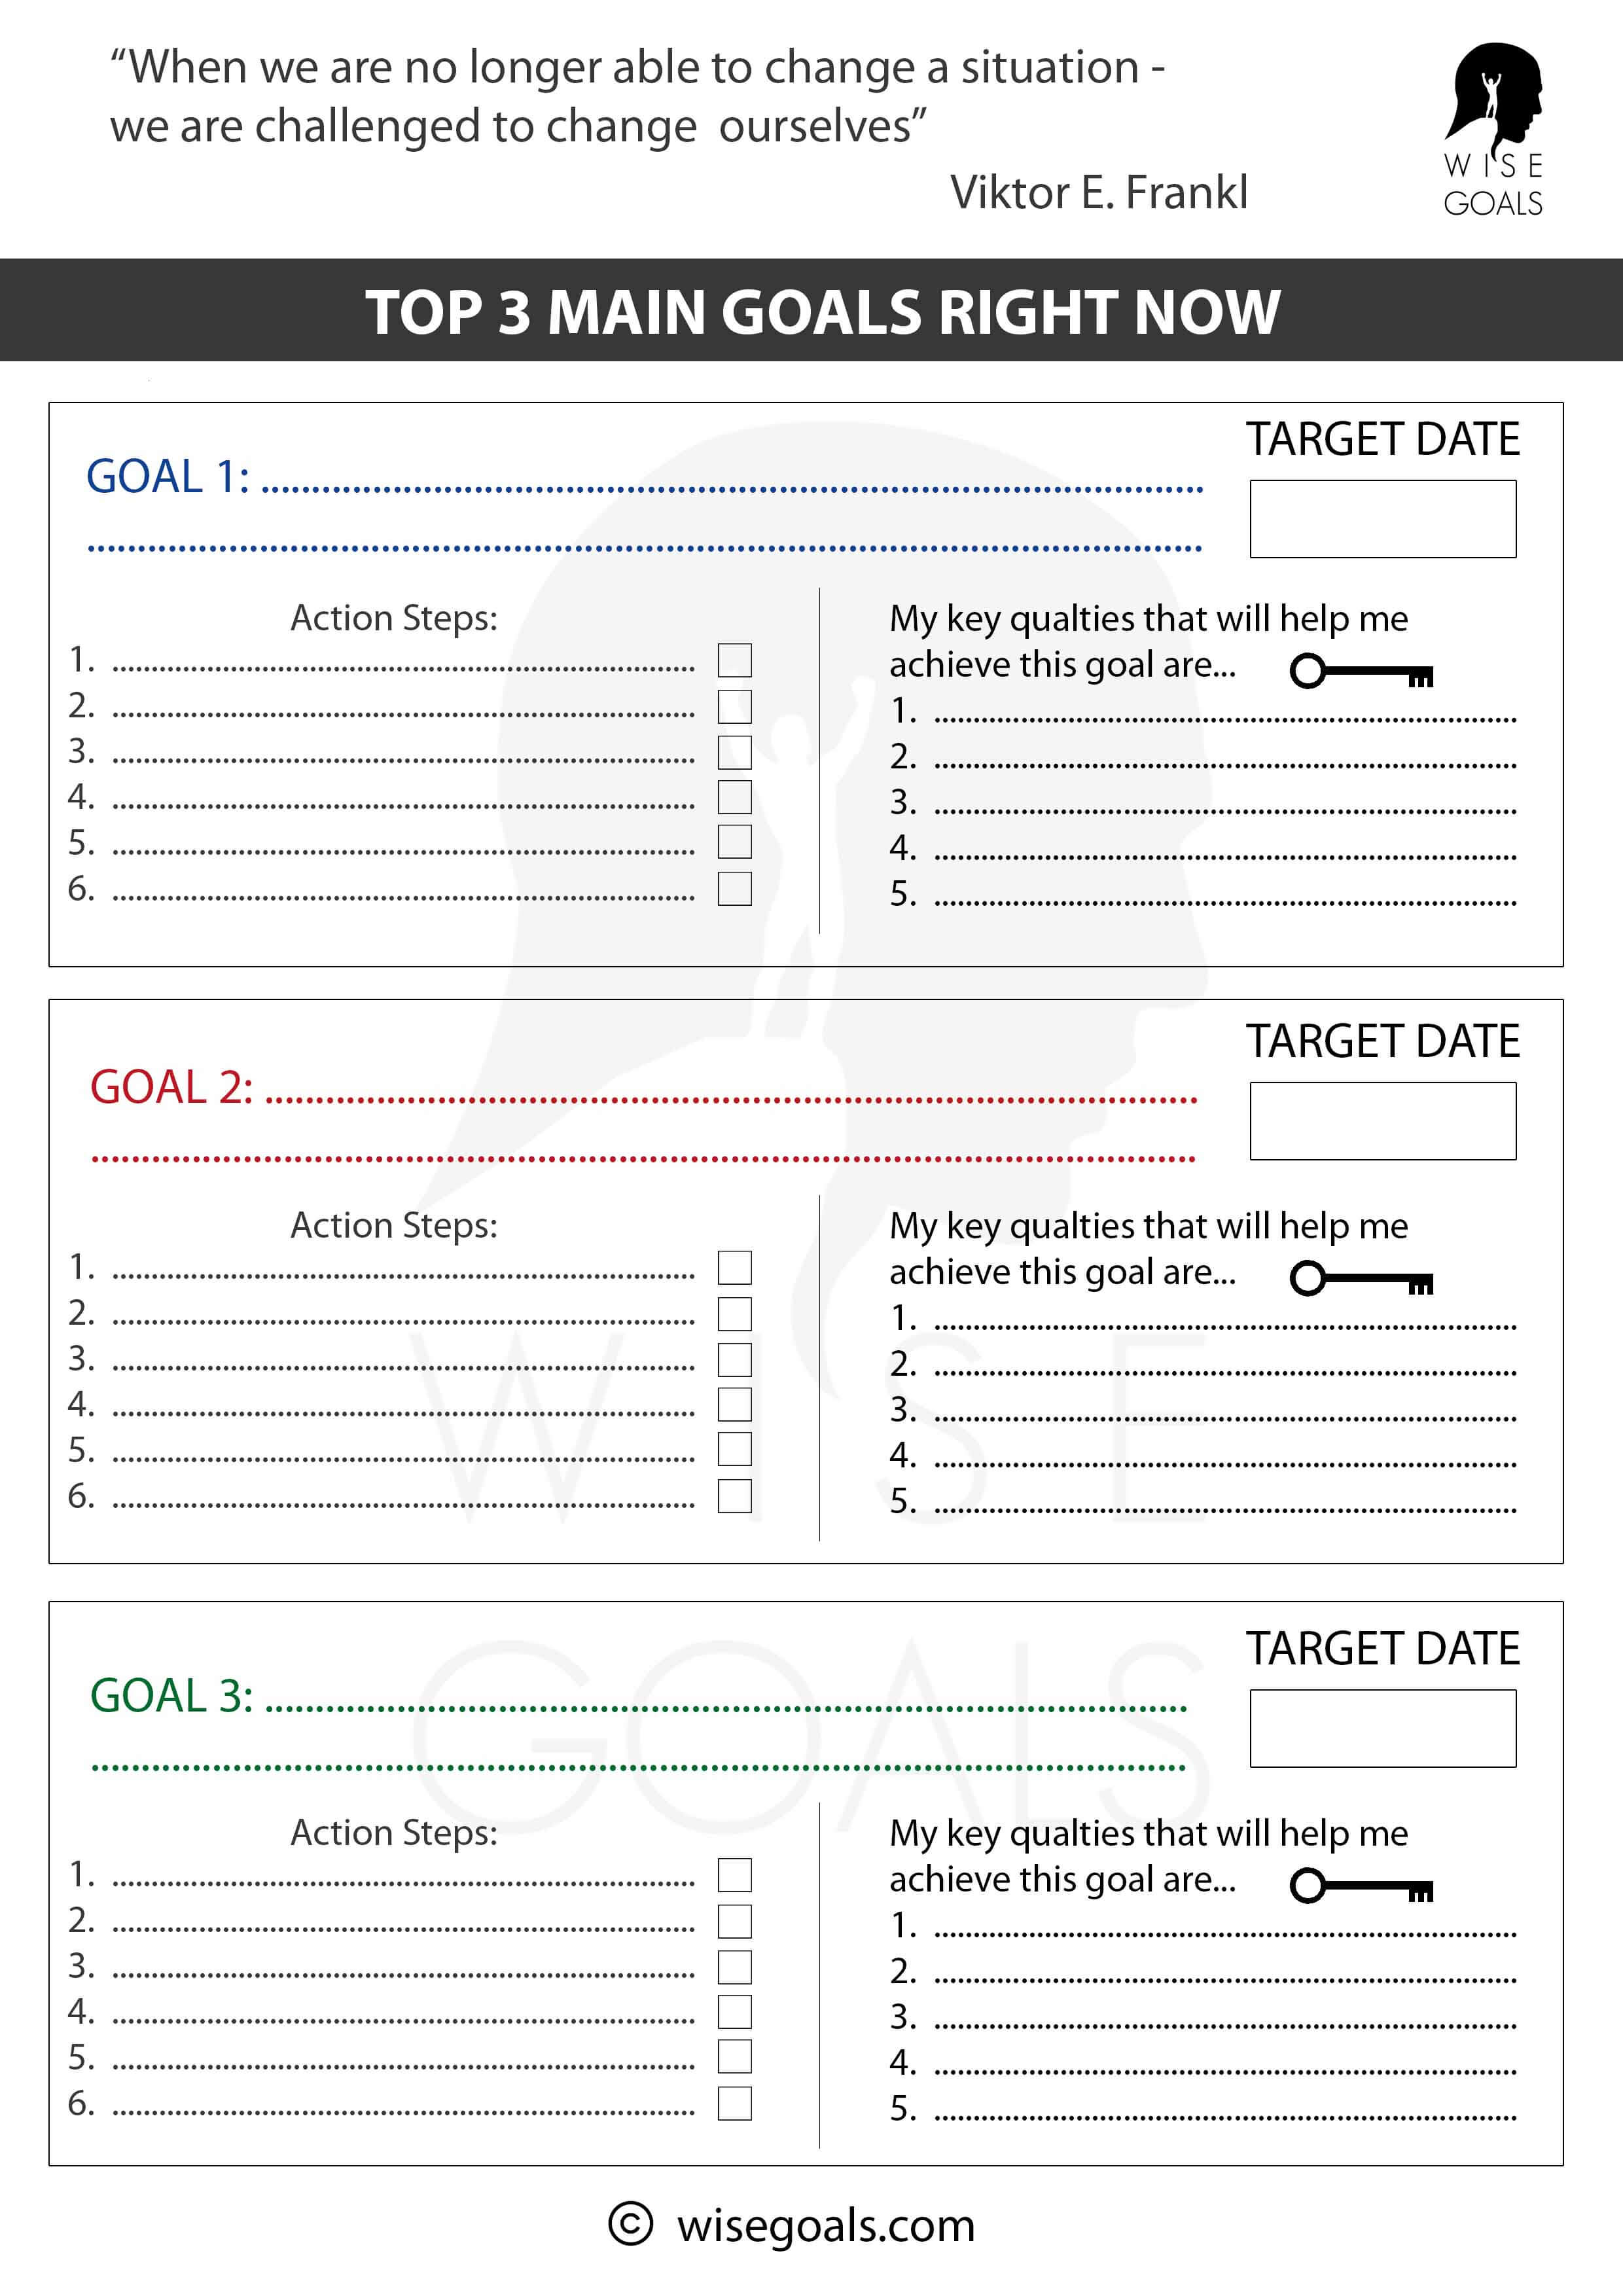 Top 3 goals right now worksheet